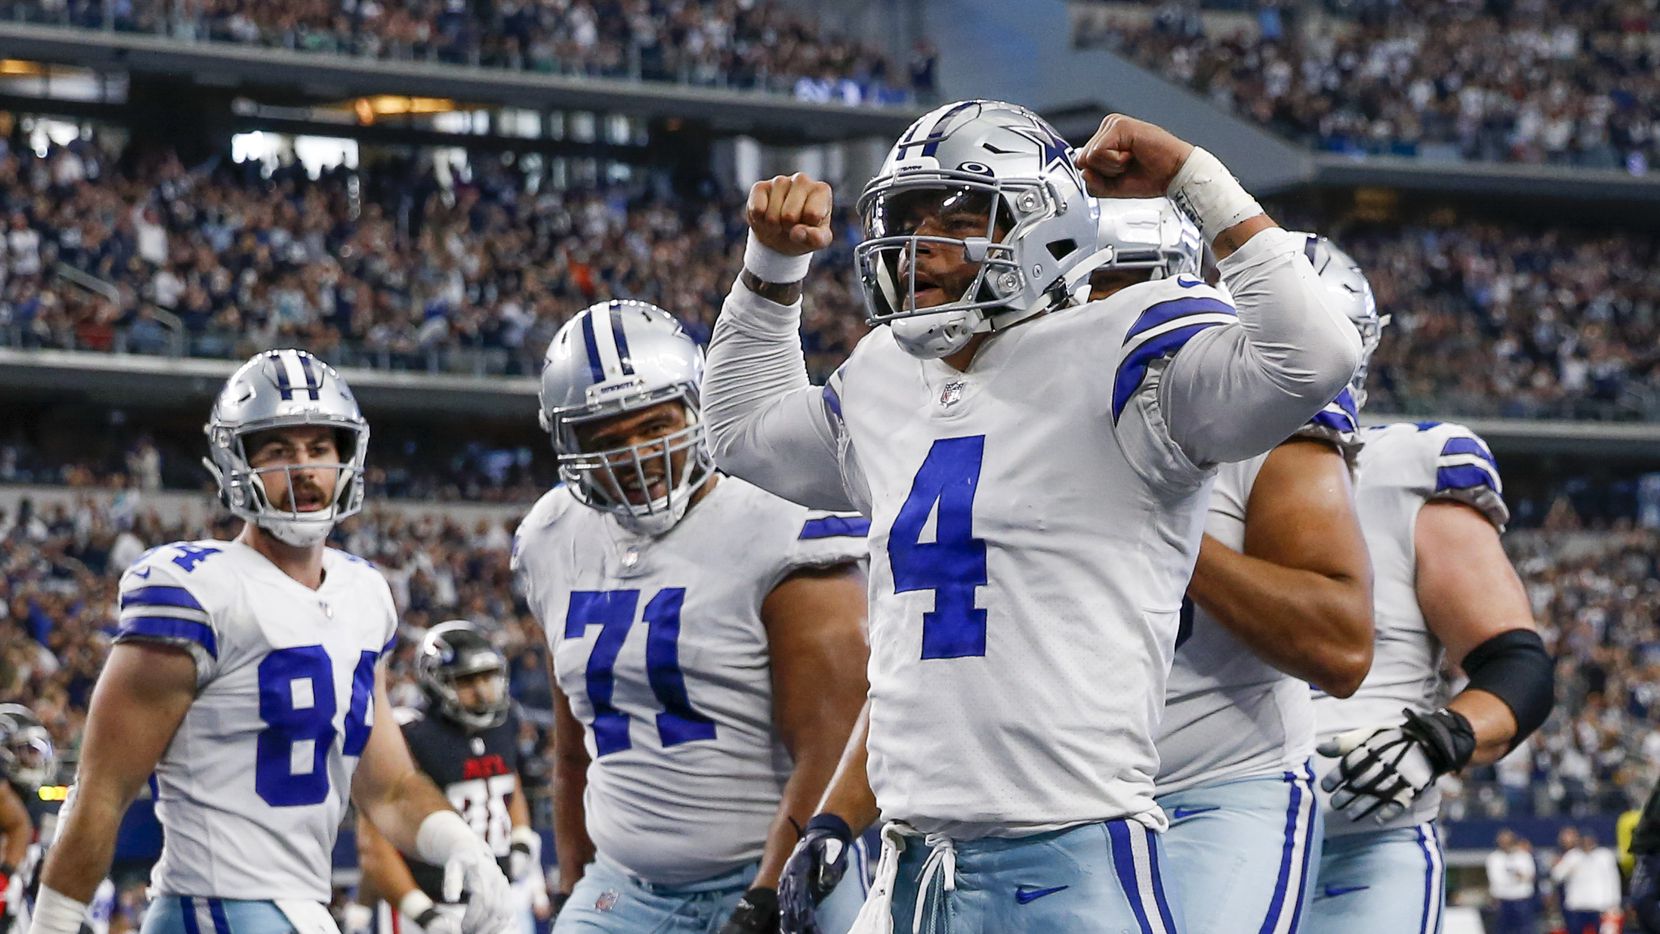 Dallas Cowboys quarterback Dak Prescott (4) flexes after scoring a touchdown during the second half of an NFL football game against the Atlanta Falcons at AT&T Stadium on Sunday, Nov. 14, 2021, in Arlington.